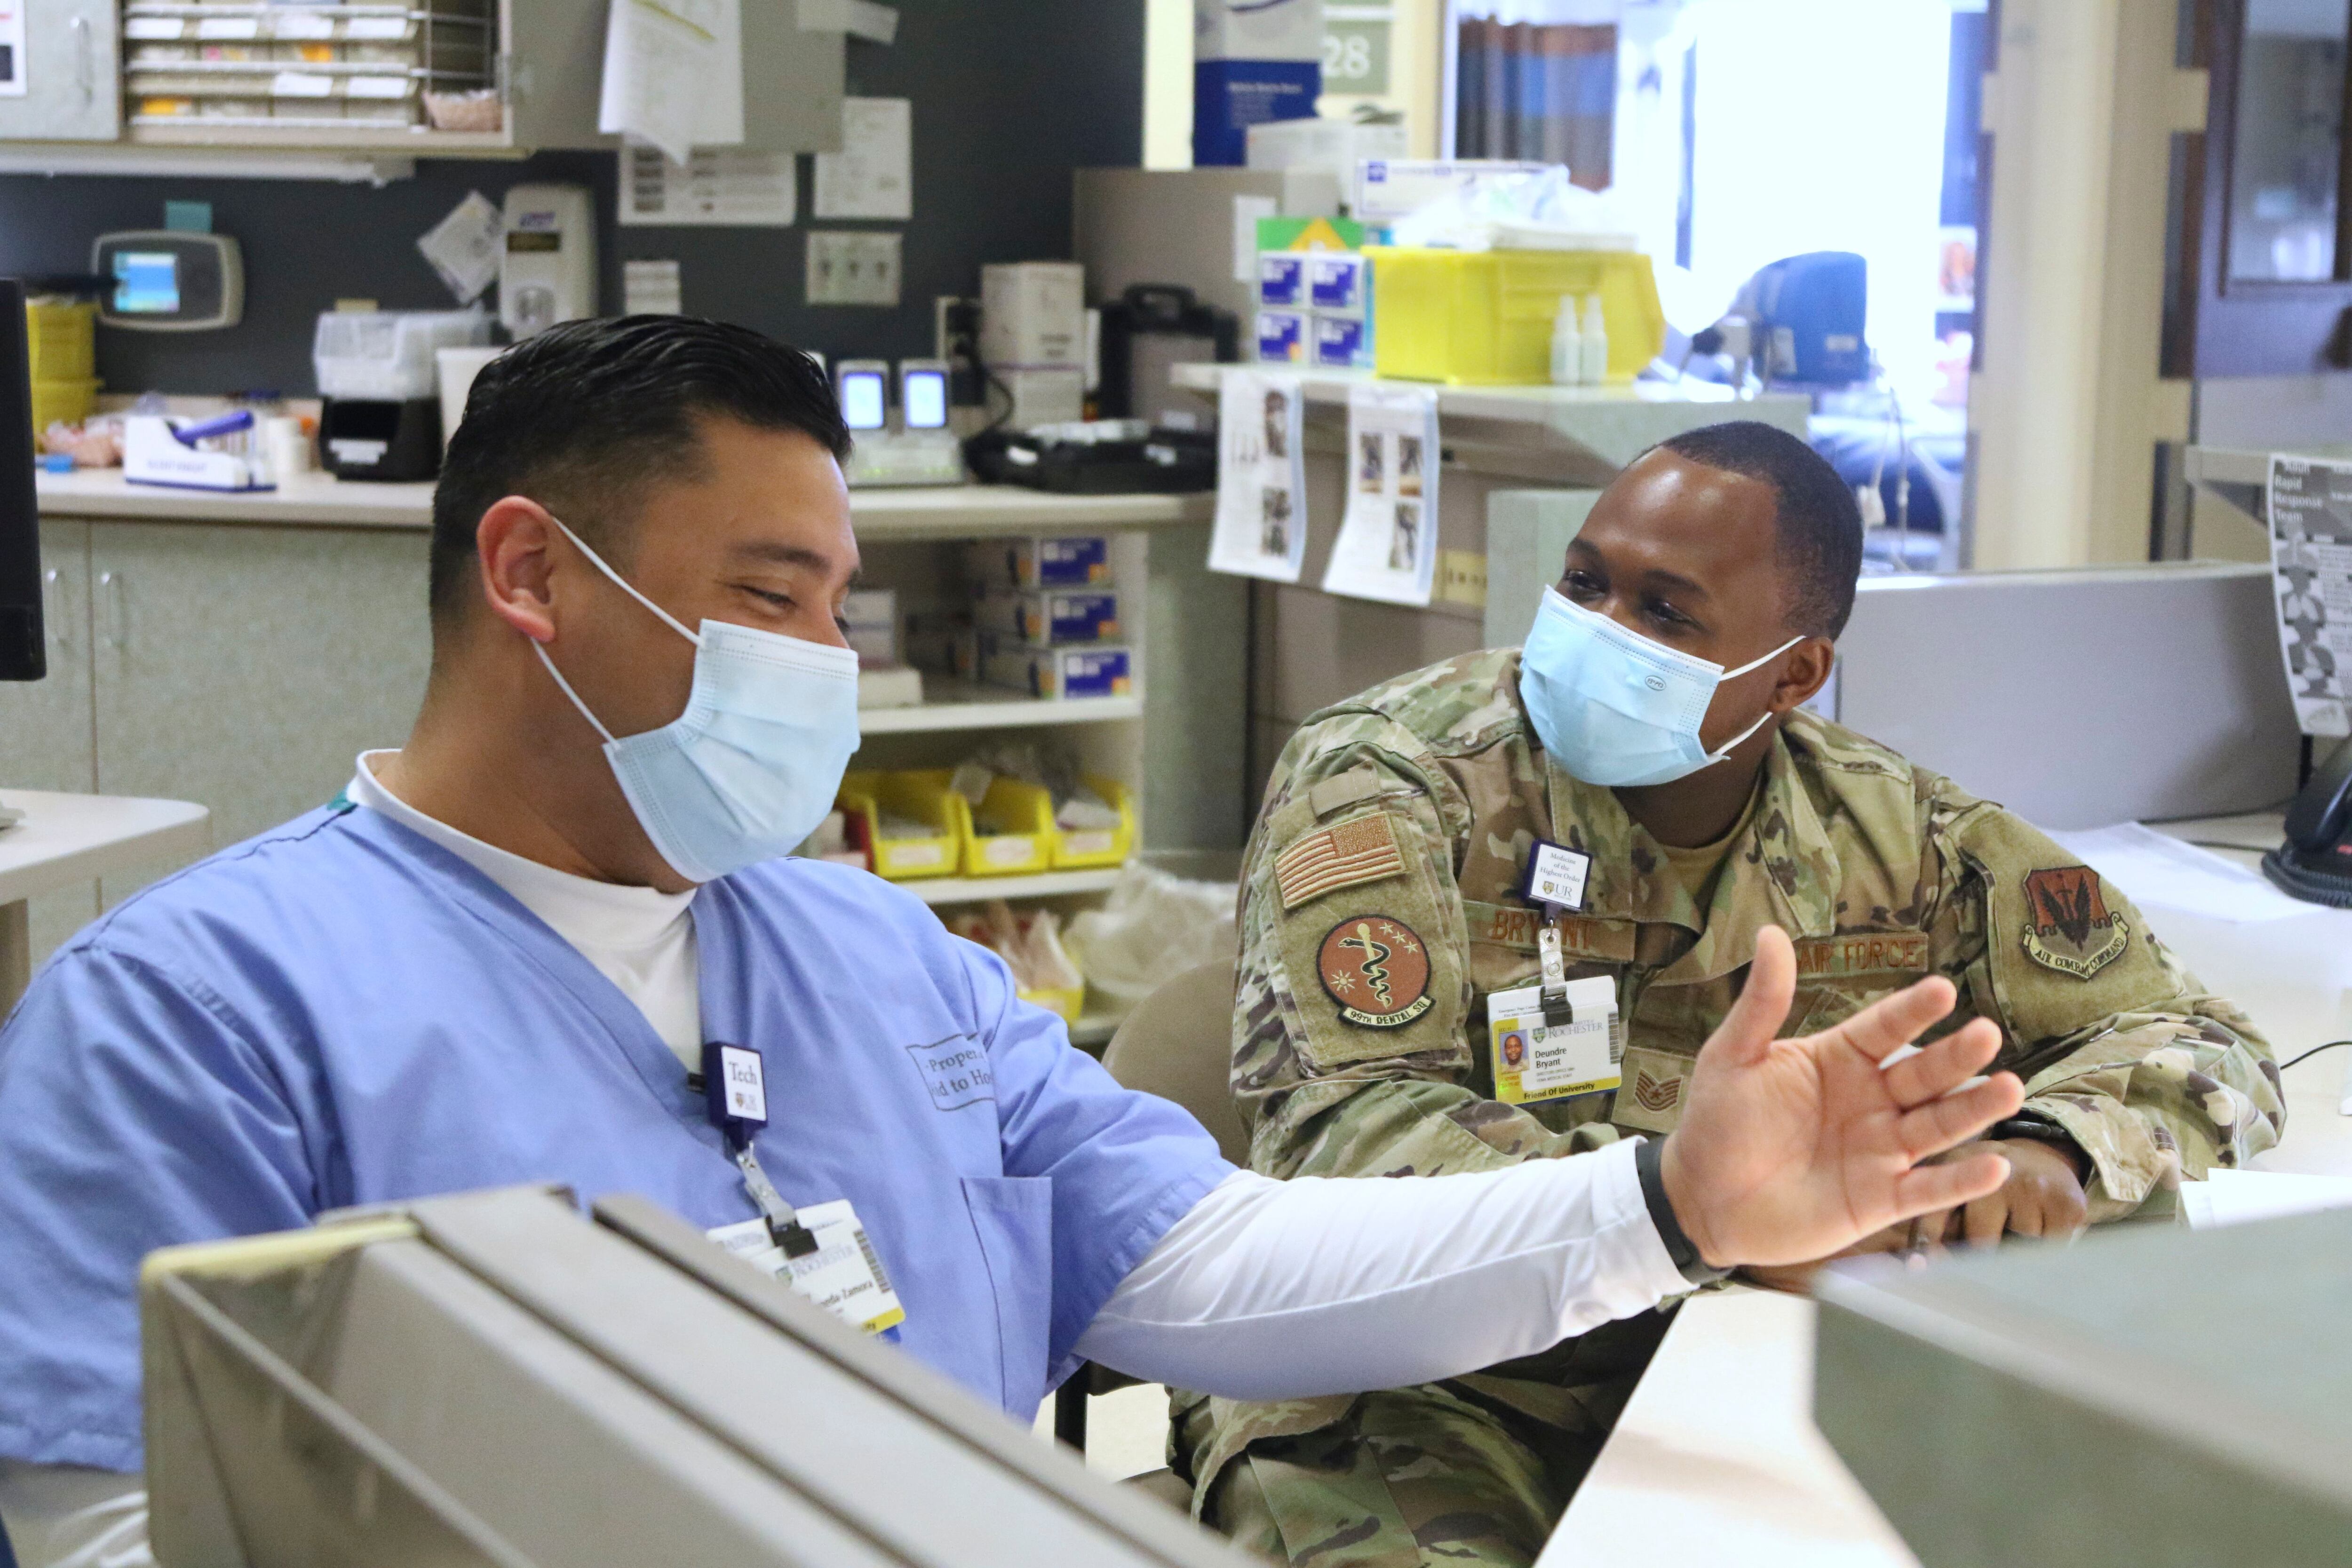 In this image provided by the U.S. Army, U.S. Air Force Tech Sgt. Deundre Bryant, right, a medical administrator, checks up on Tech Sgt. Rony Castaneda-Zamora a medical technician, while supporting the COVID response operations at University of Rochester Medical Center, Rochester, N.Y., Feb.16, 2022. (Spc. Khalan Moore/U.S. Army via AP)